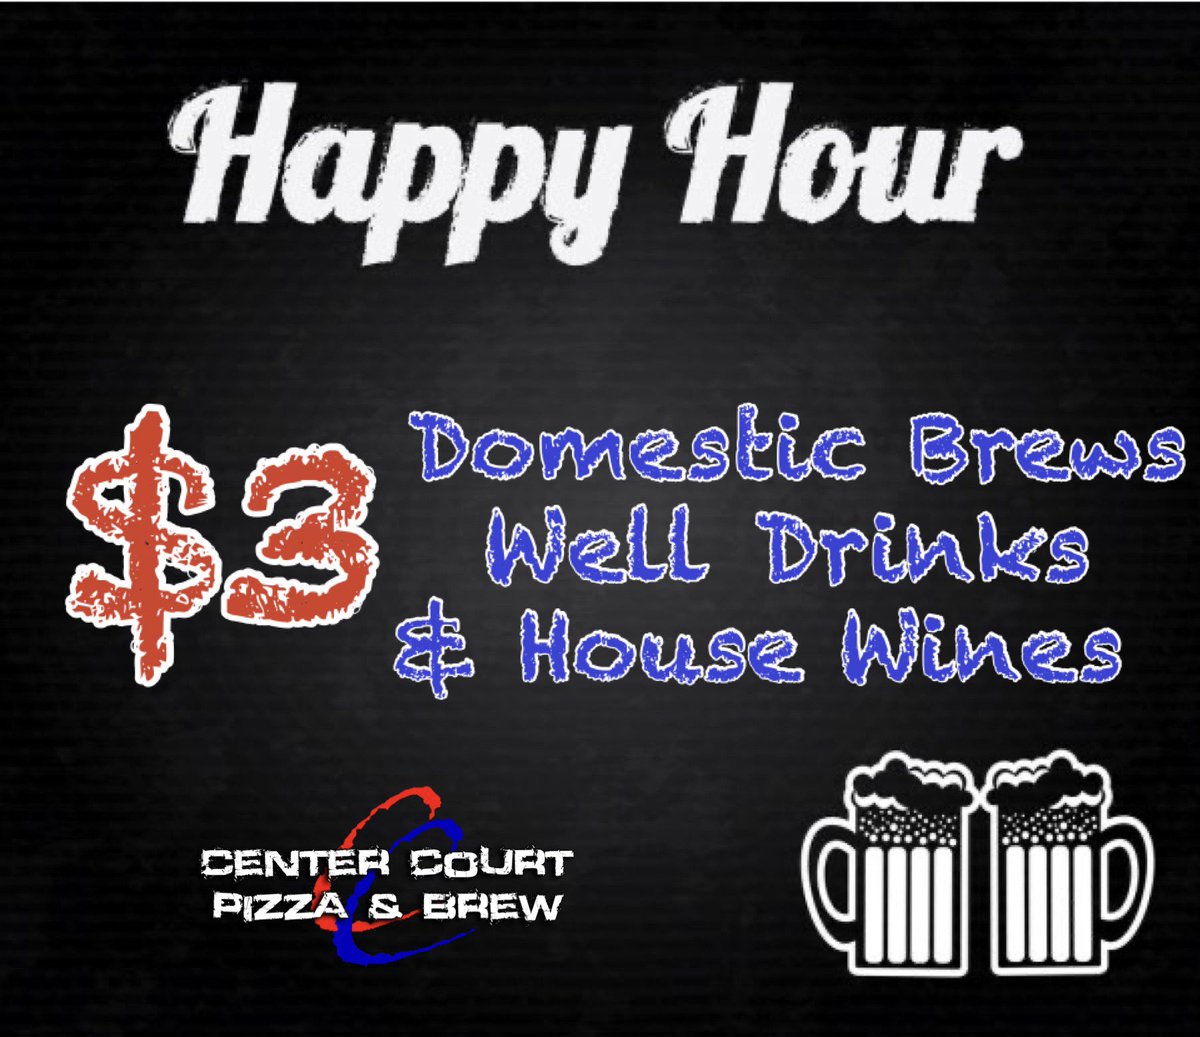 Friday means ALL DAY HAPPY HOUR!

$3 Domestic Drafts
$3 Well Drinks
$3 House Wines 

#ccpb #centercourtpizzaandbrew #centercourtvintagepark #vintagepark #vintageparkhouston #happyhour #alldayhappyhour #whylimithappytoanhour